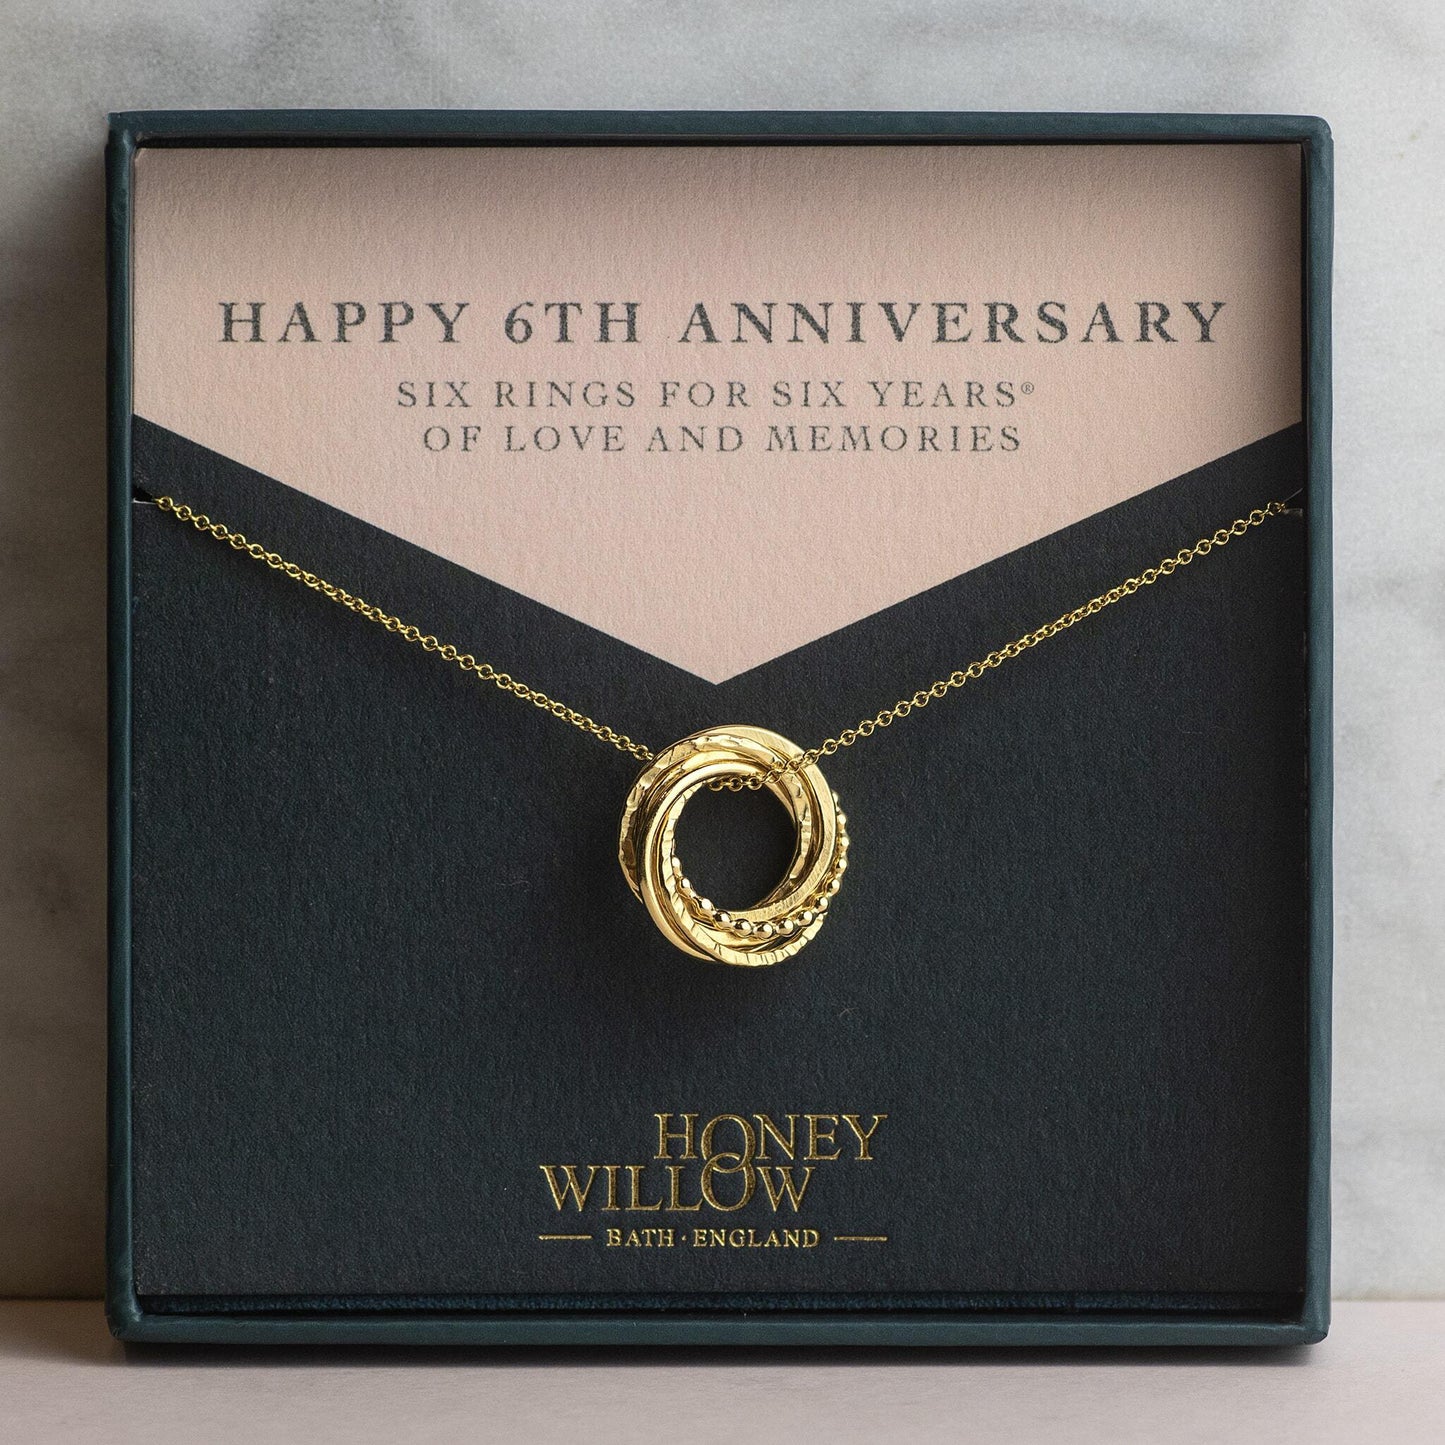 6th Anniversary Necklace - The Original 6 Rings for 6 Years - Petite Gold